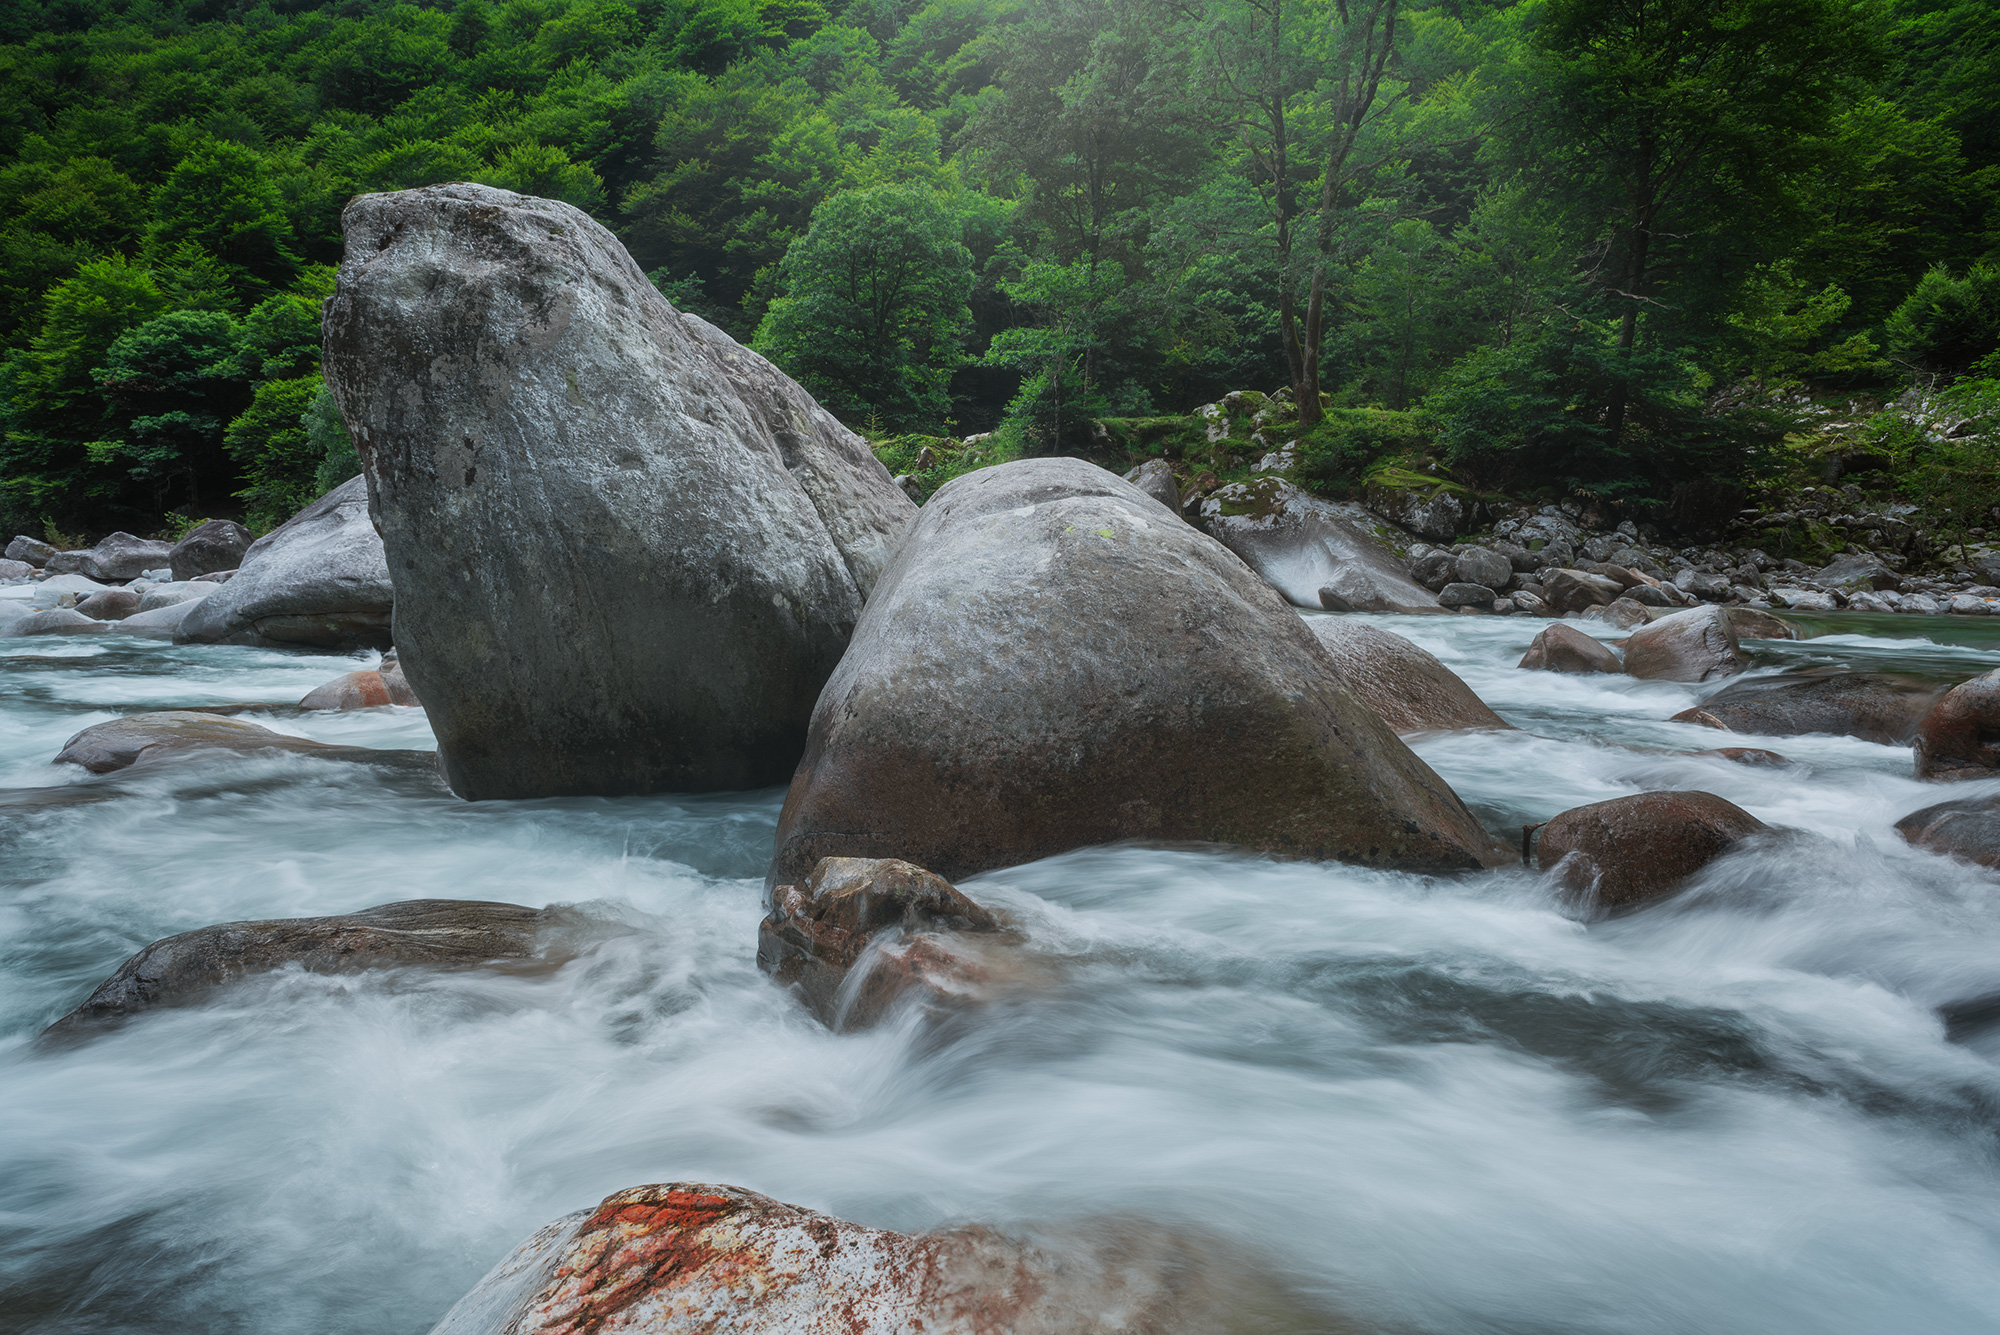 Landscape photography of the Verzasca River in Ticino, located in the southern part of Switzerland.